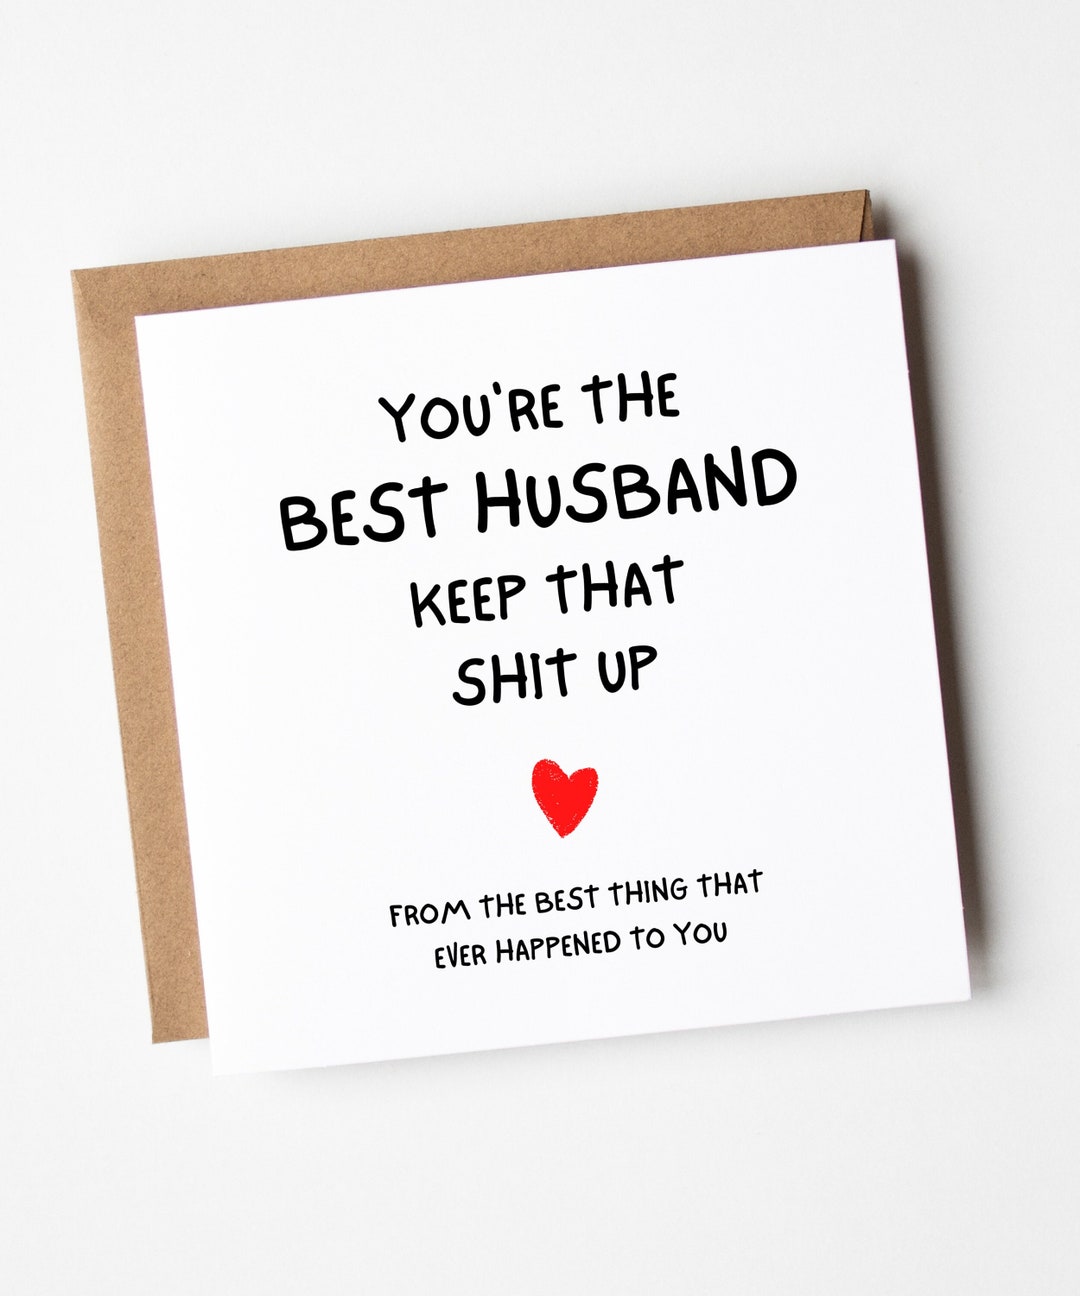 husband-birthday-card-from-wife-you-re-the-best-husband-birthday-card-husband-birthday-card